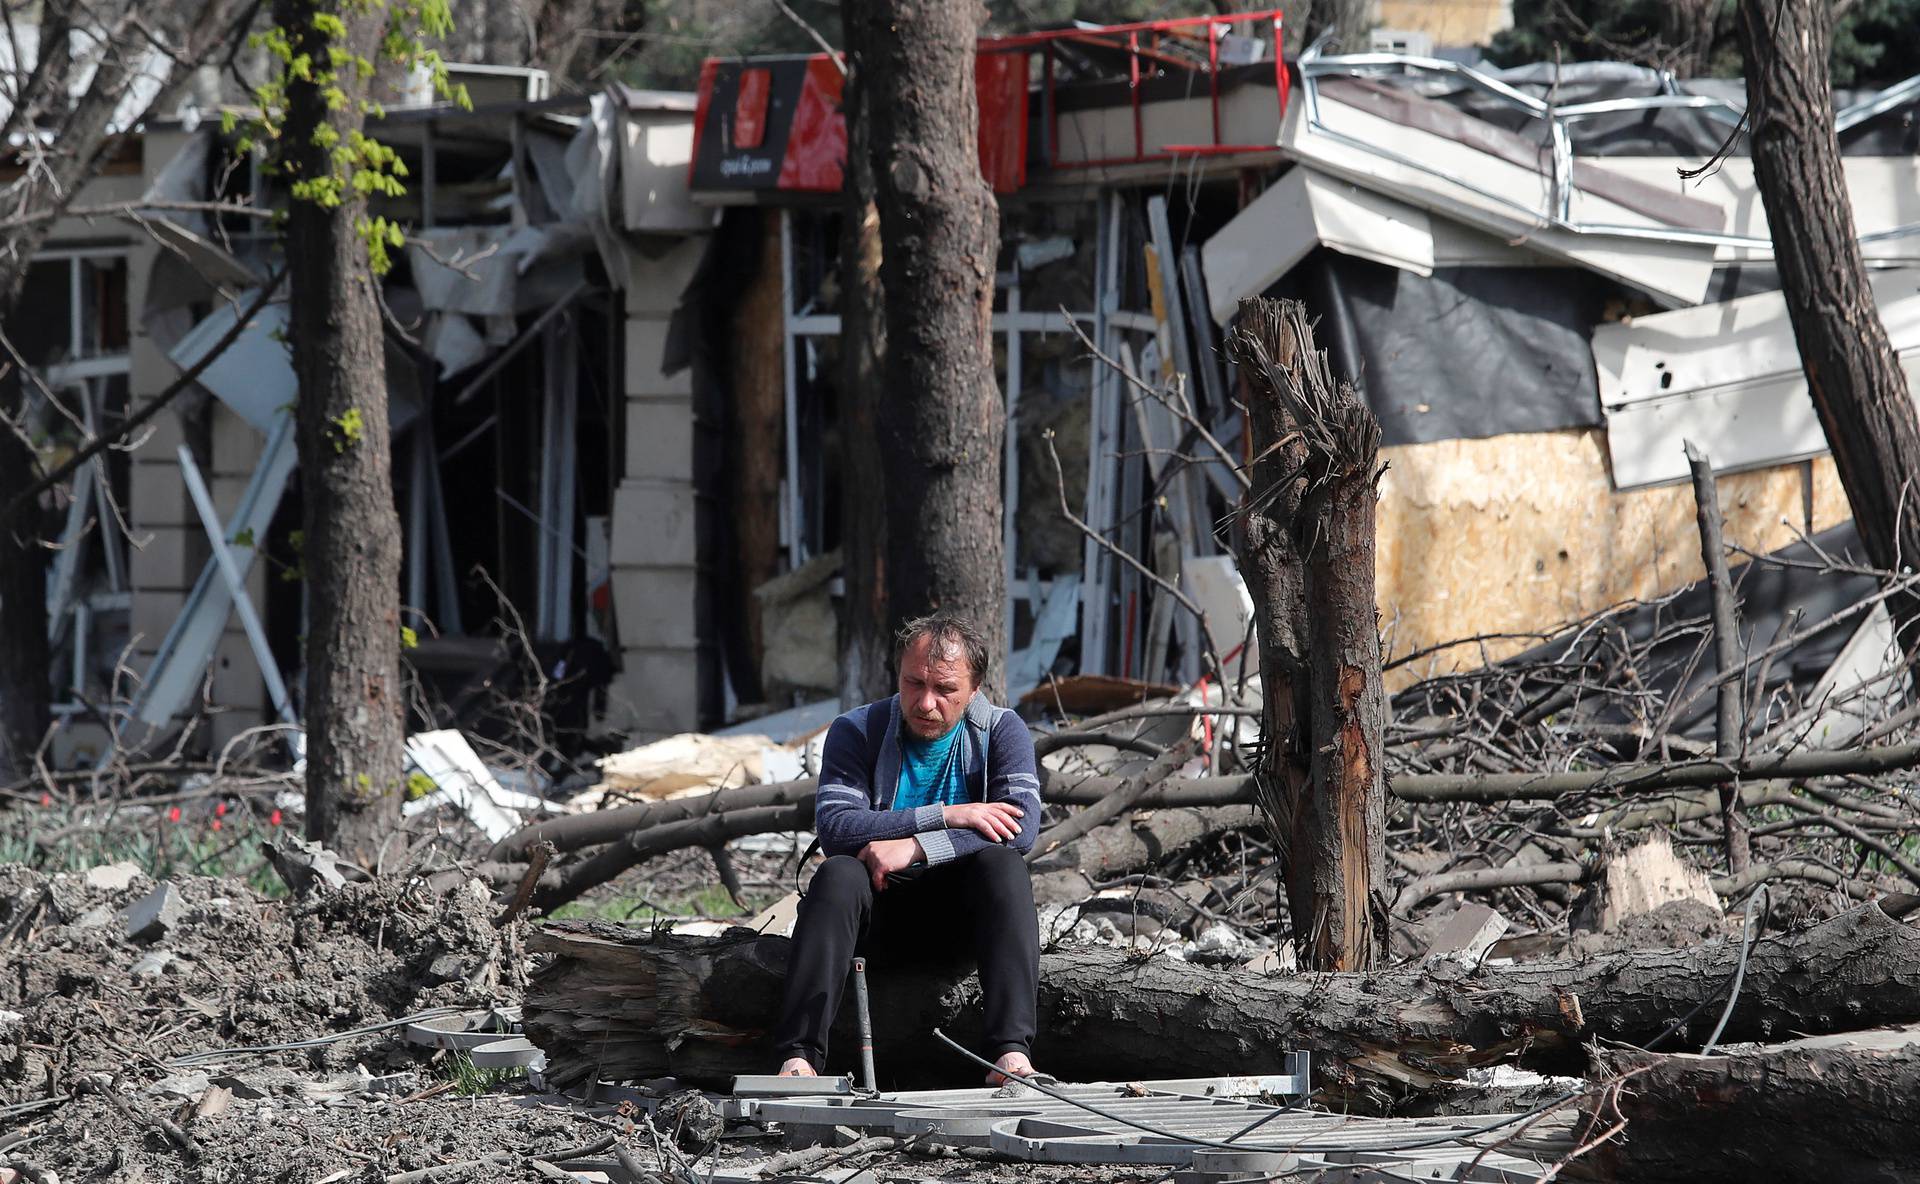 A view shows a damaged building in Mariupol